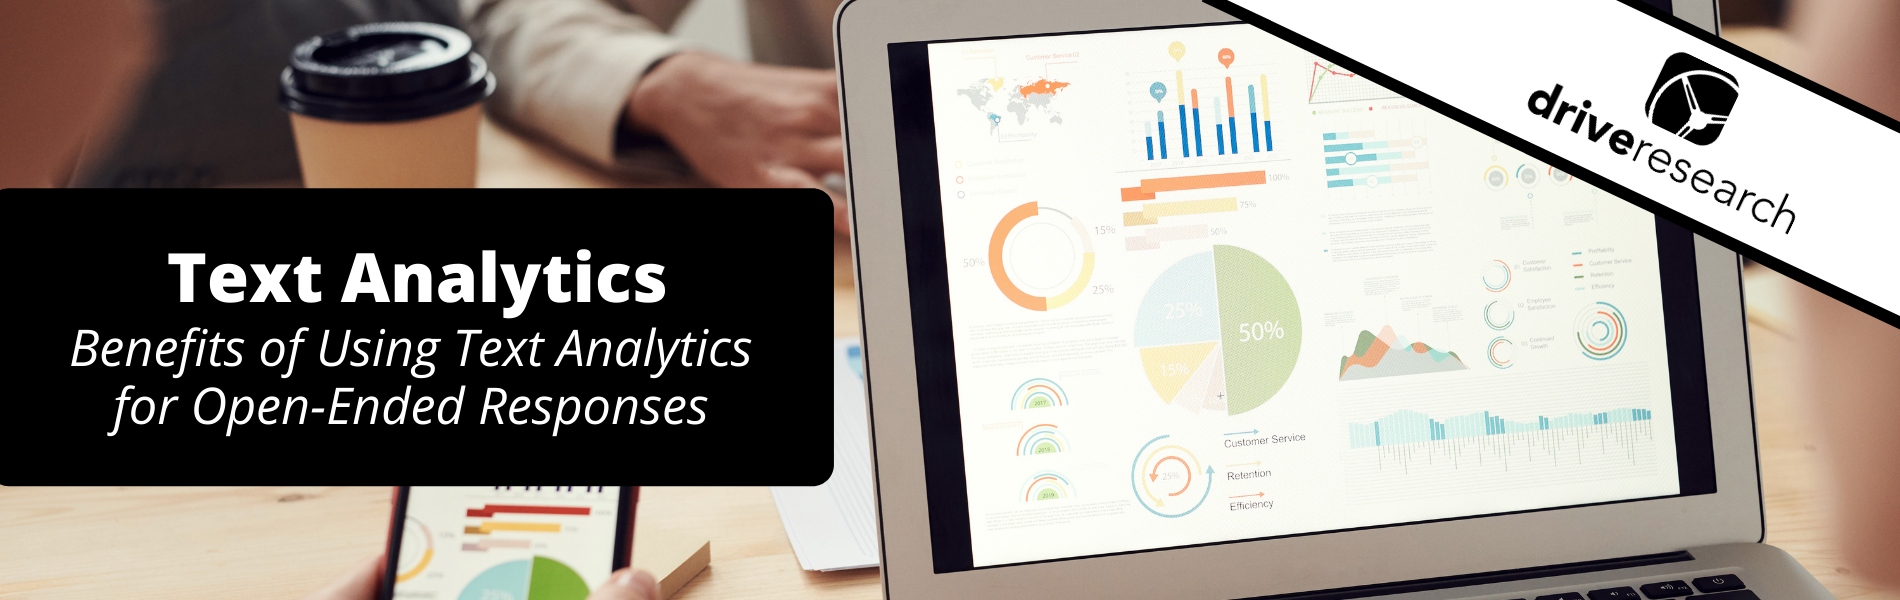 5 Benefits of Using Text Analytics for Open-Ended Survey Responses